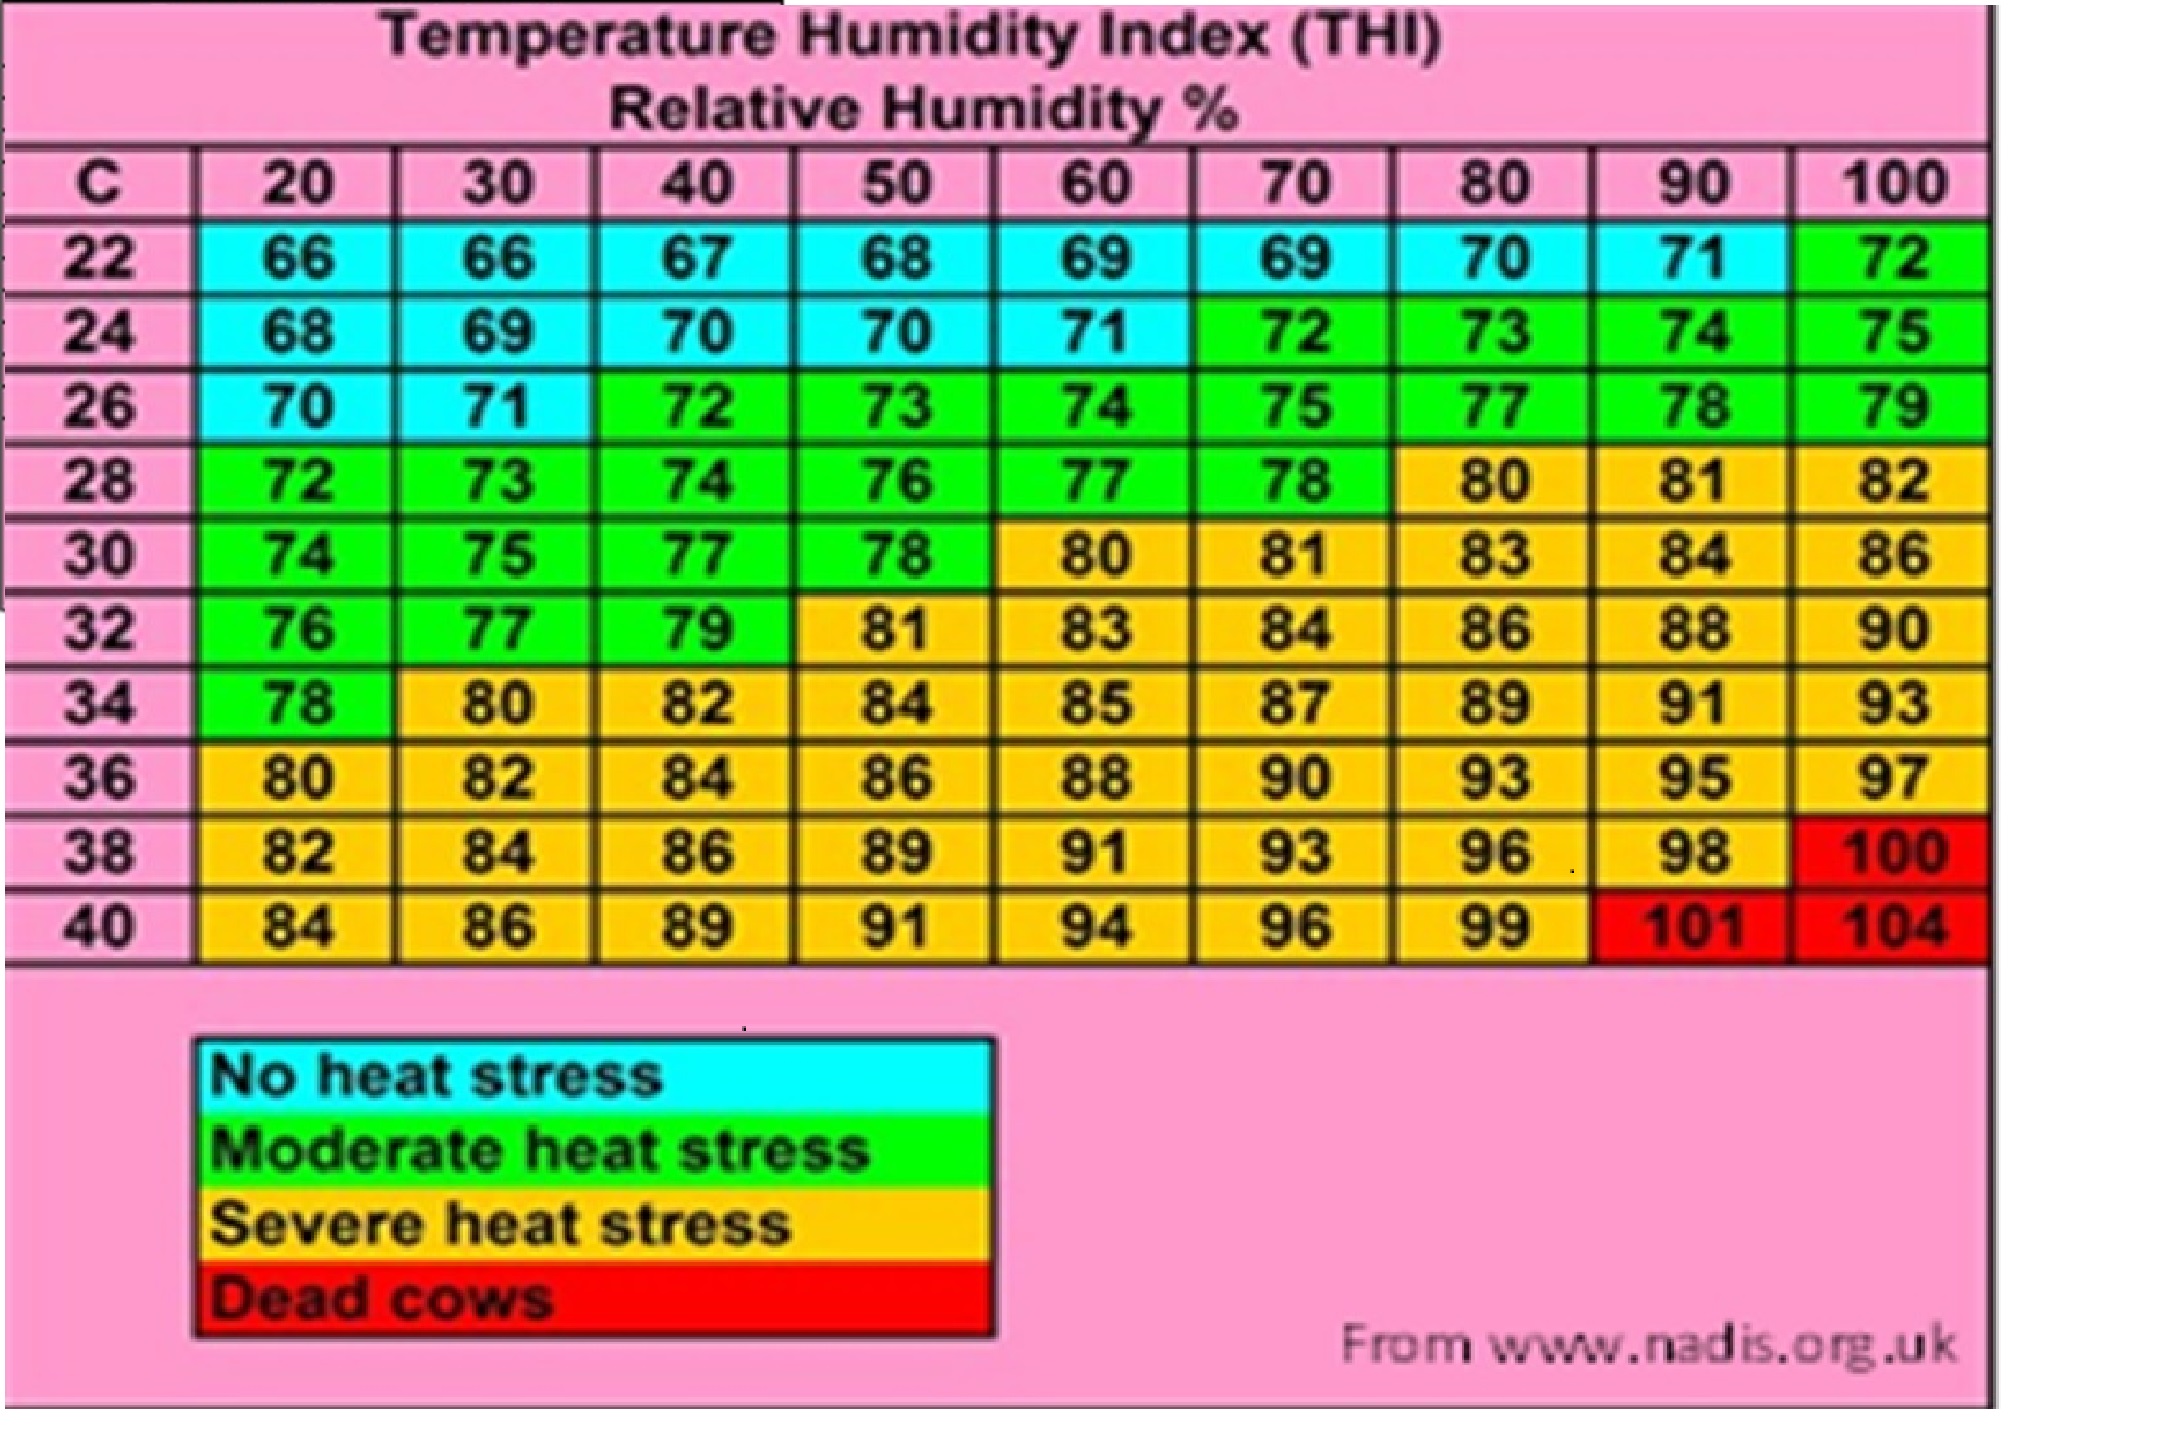 Heat Index Chart For Horses